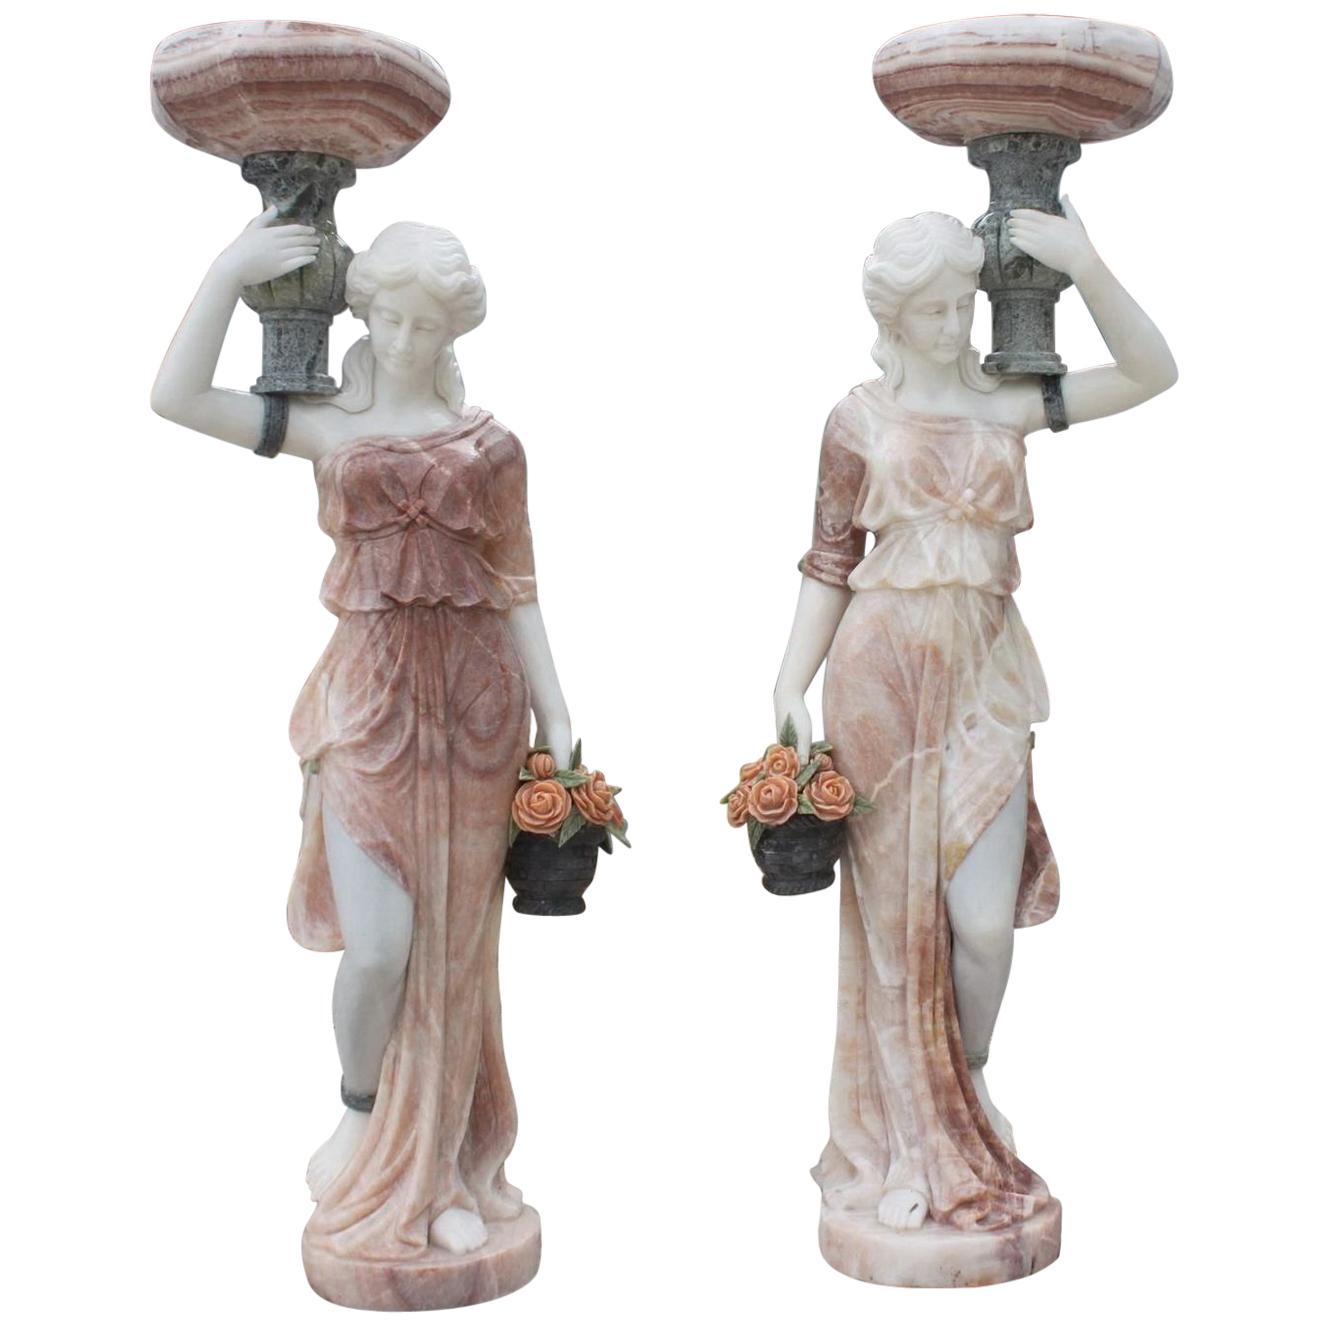 Pair of Baroque High Quality Marble Statues Human Size